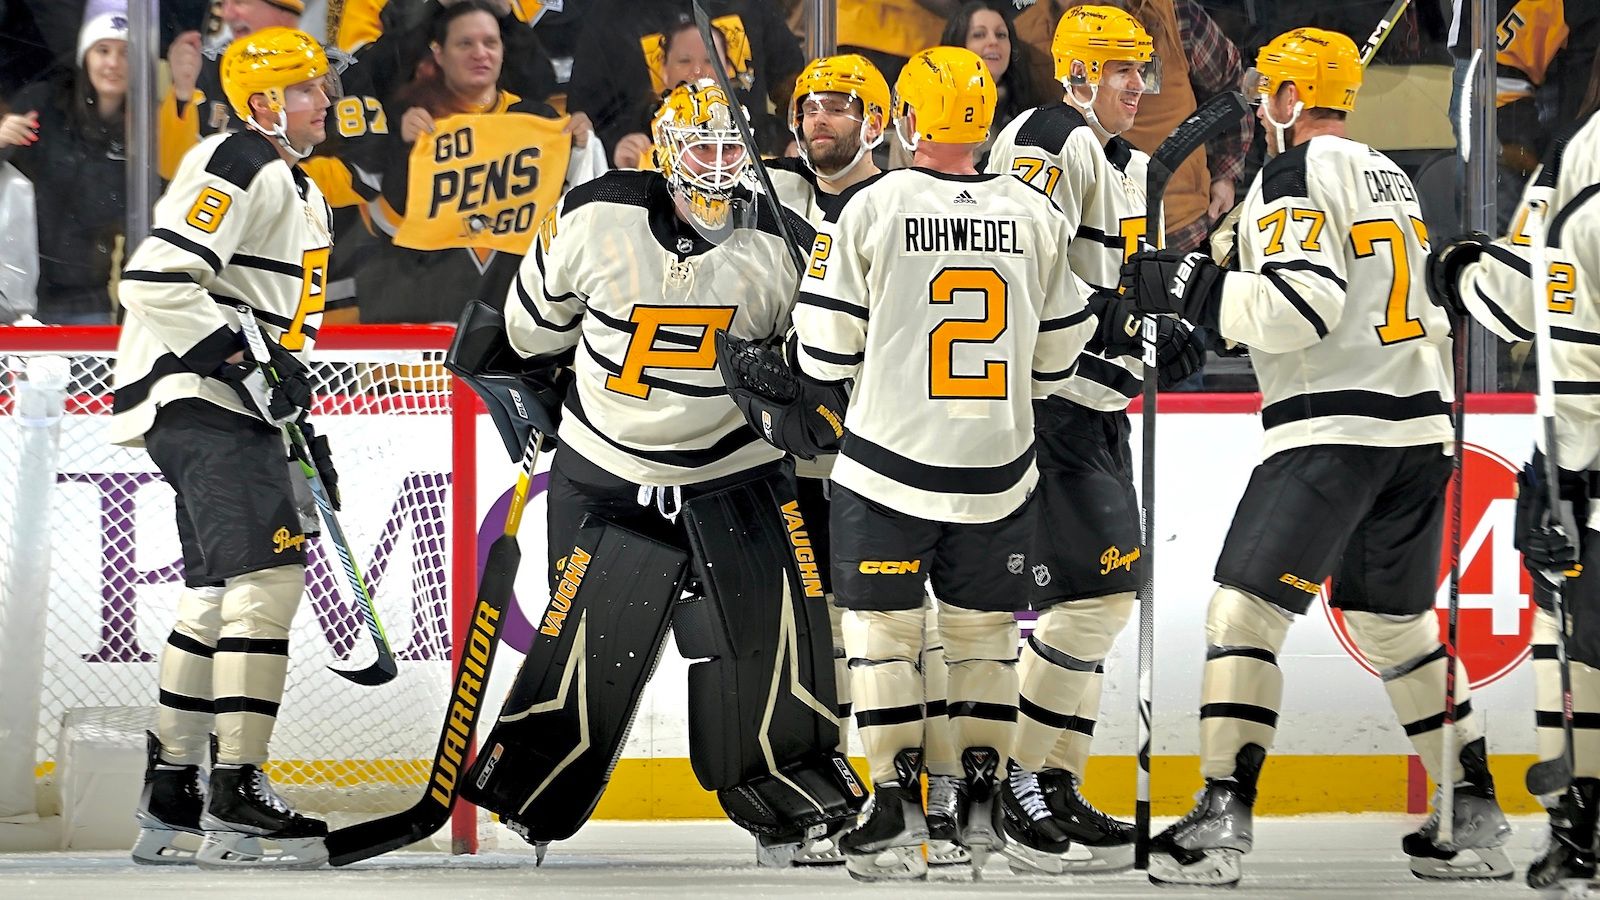 Penguins want to have fun, but need a win in the Winter Classic